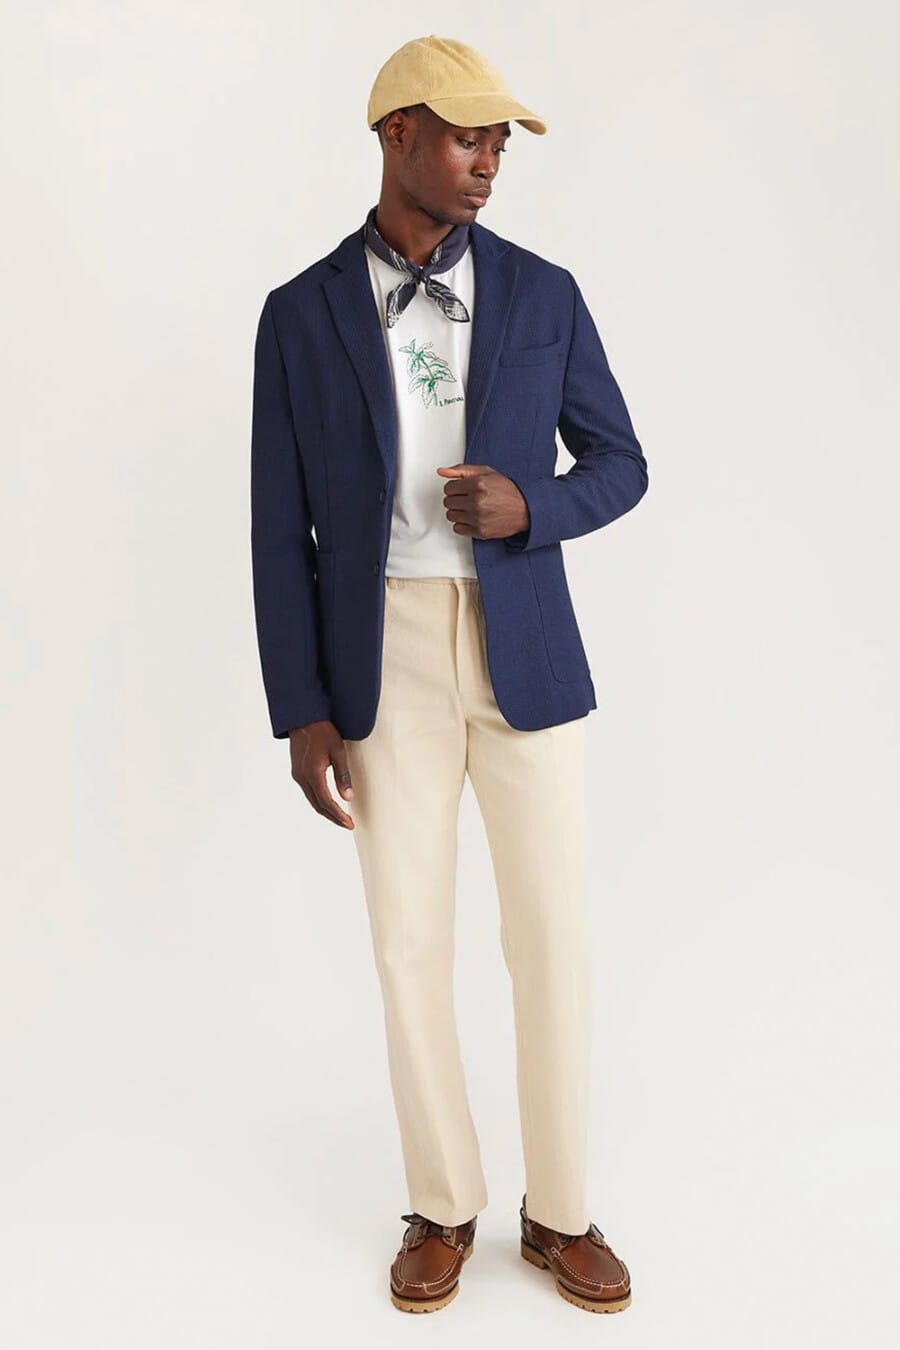 Navy single-breasted blazer, light cream chinos, white printed T-shirt, navy neckerchief, beige baseball cap and brown leather chunky boat shoes outfit